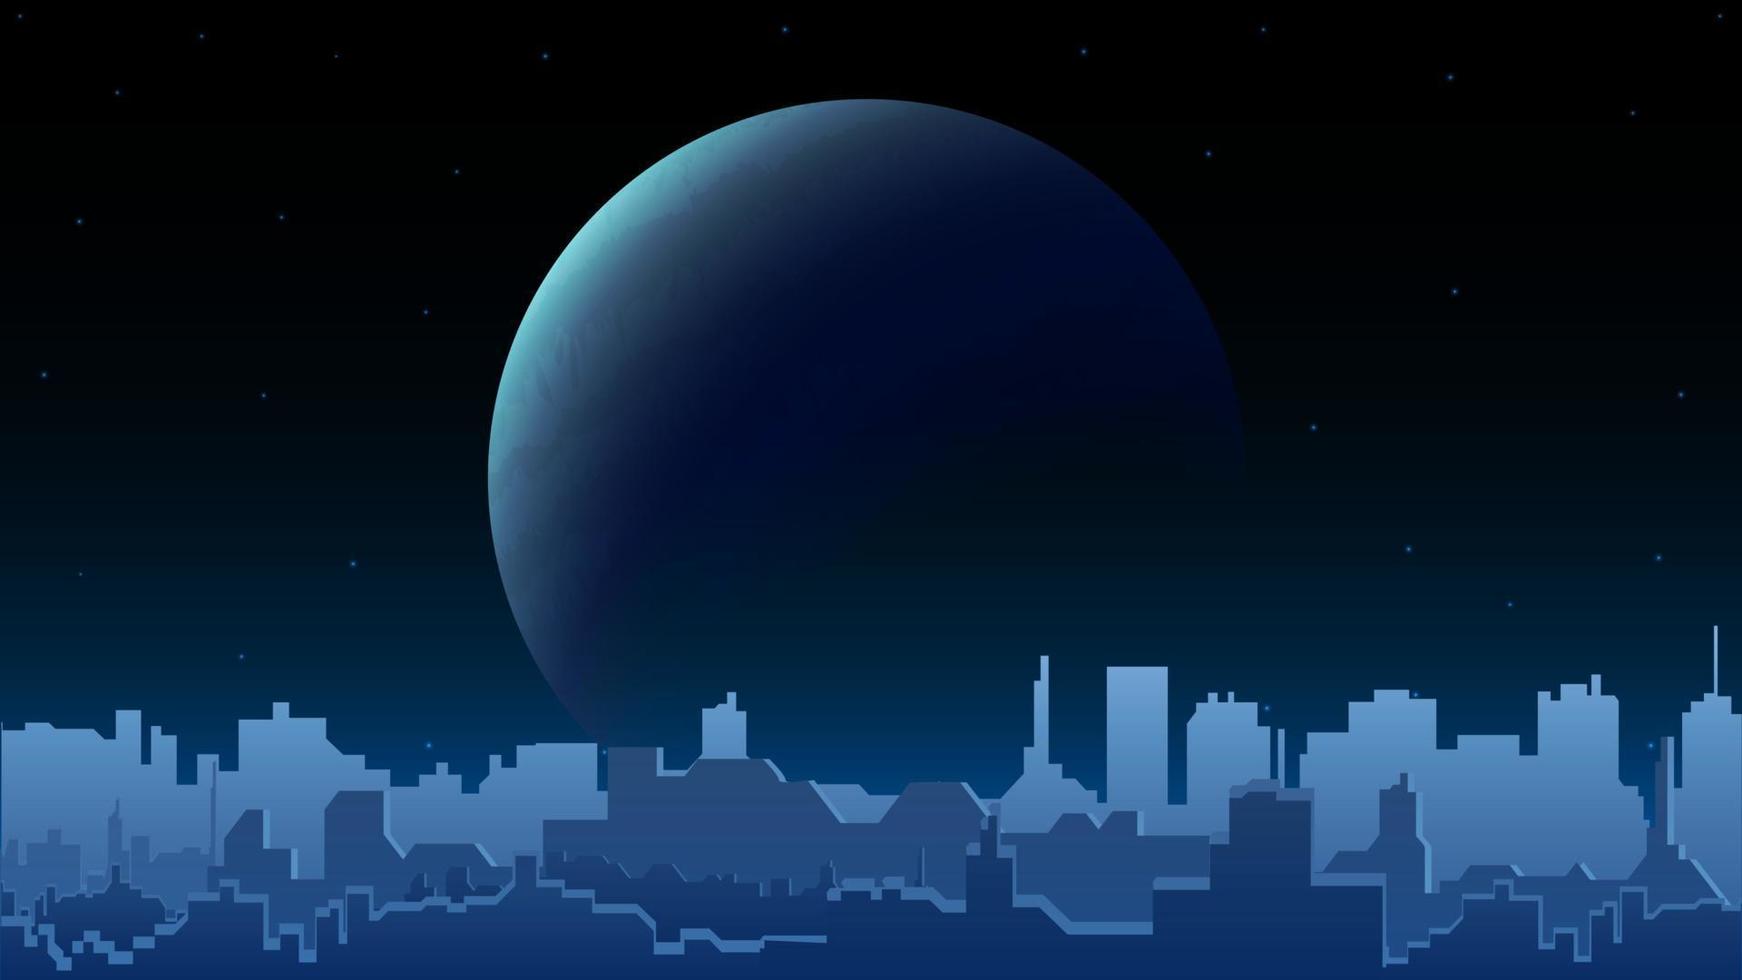 Night city landscape with a large planet on the horizon and the silhouette of a modern city with high-rise buildings. Blue night city landscape vector